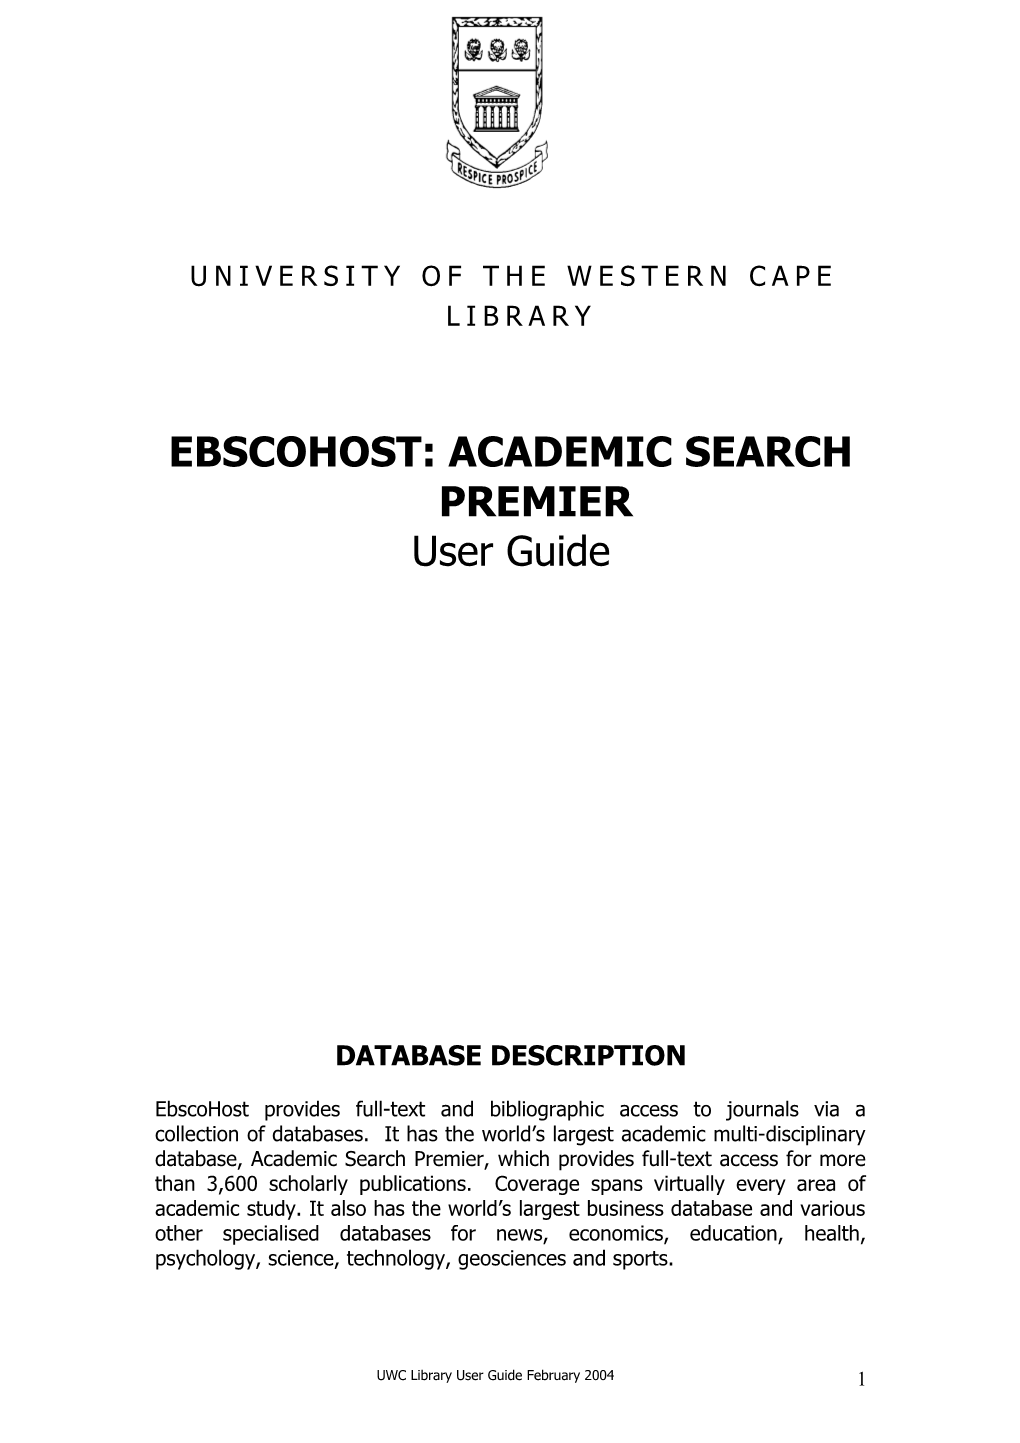 Guide to Searching Academic Search Premier Ebscohost